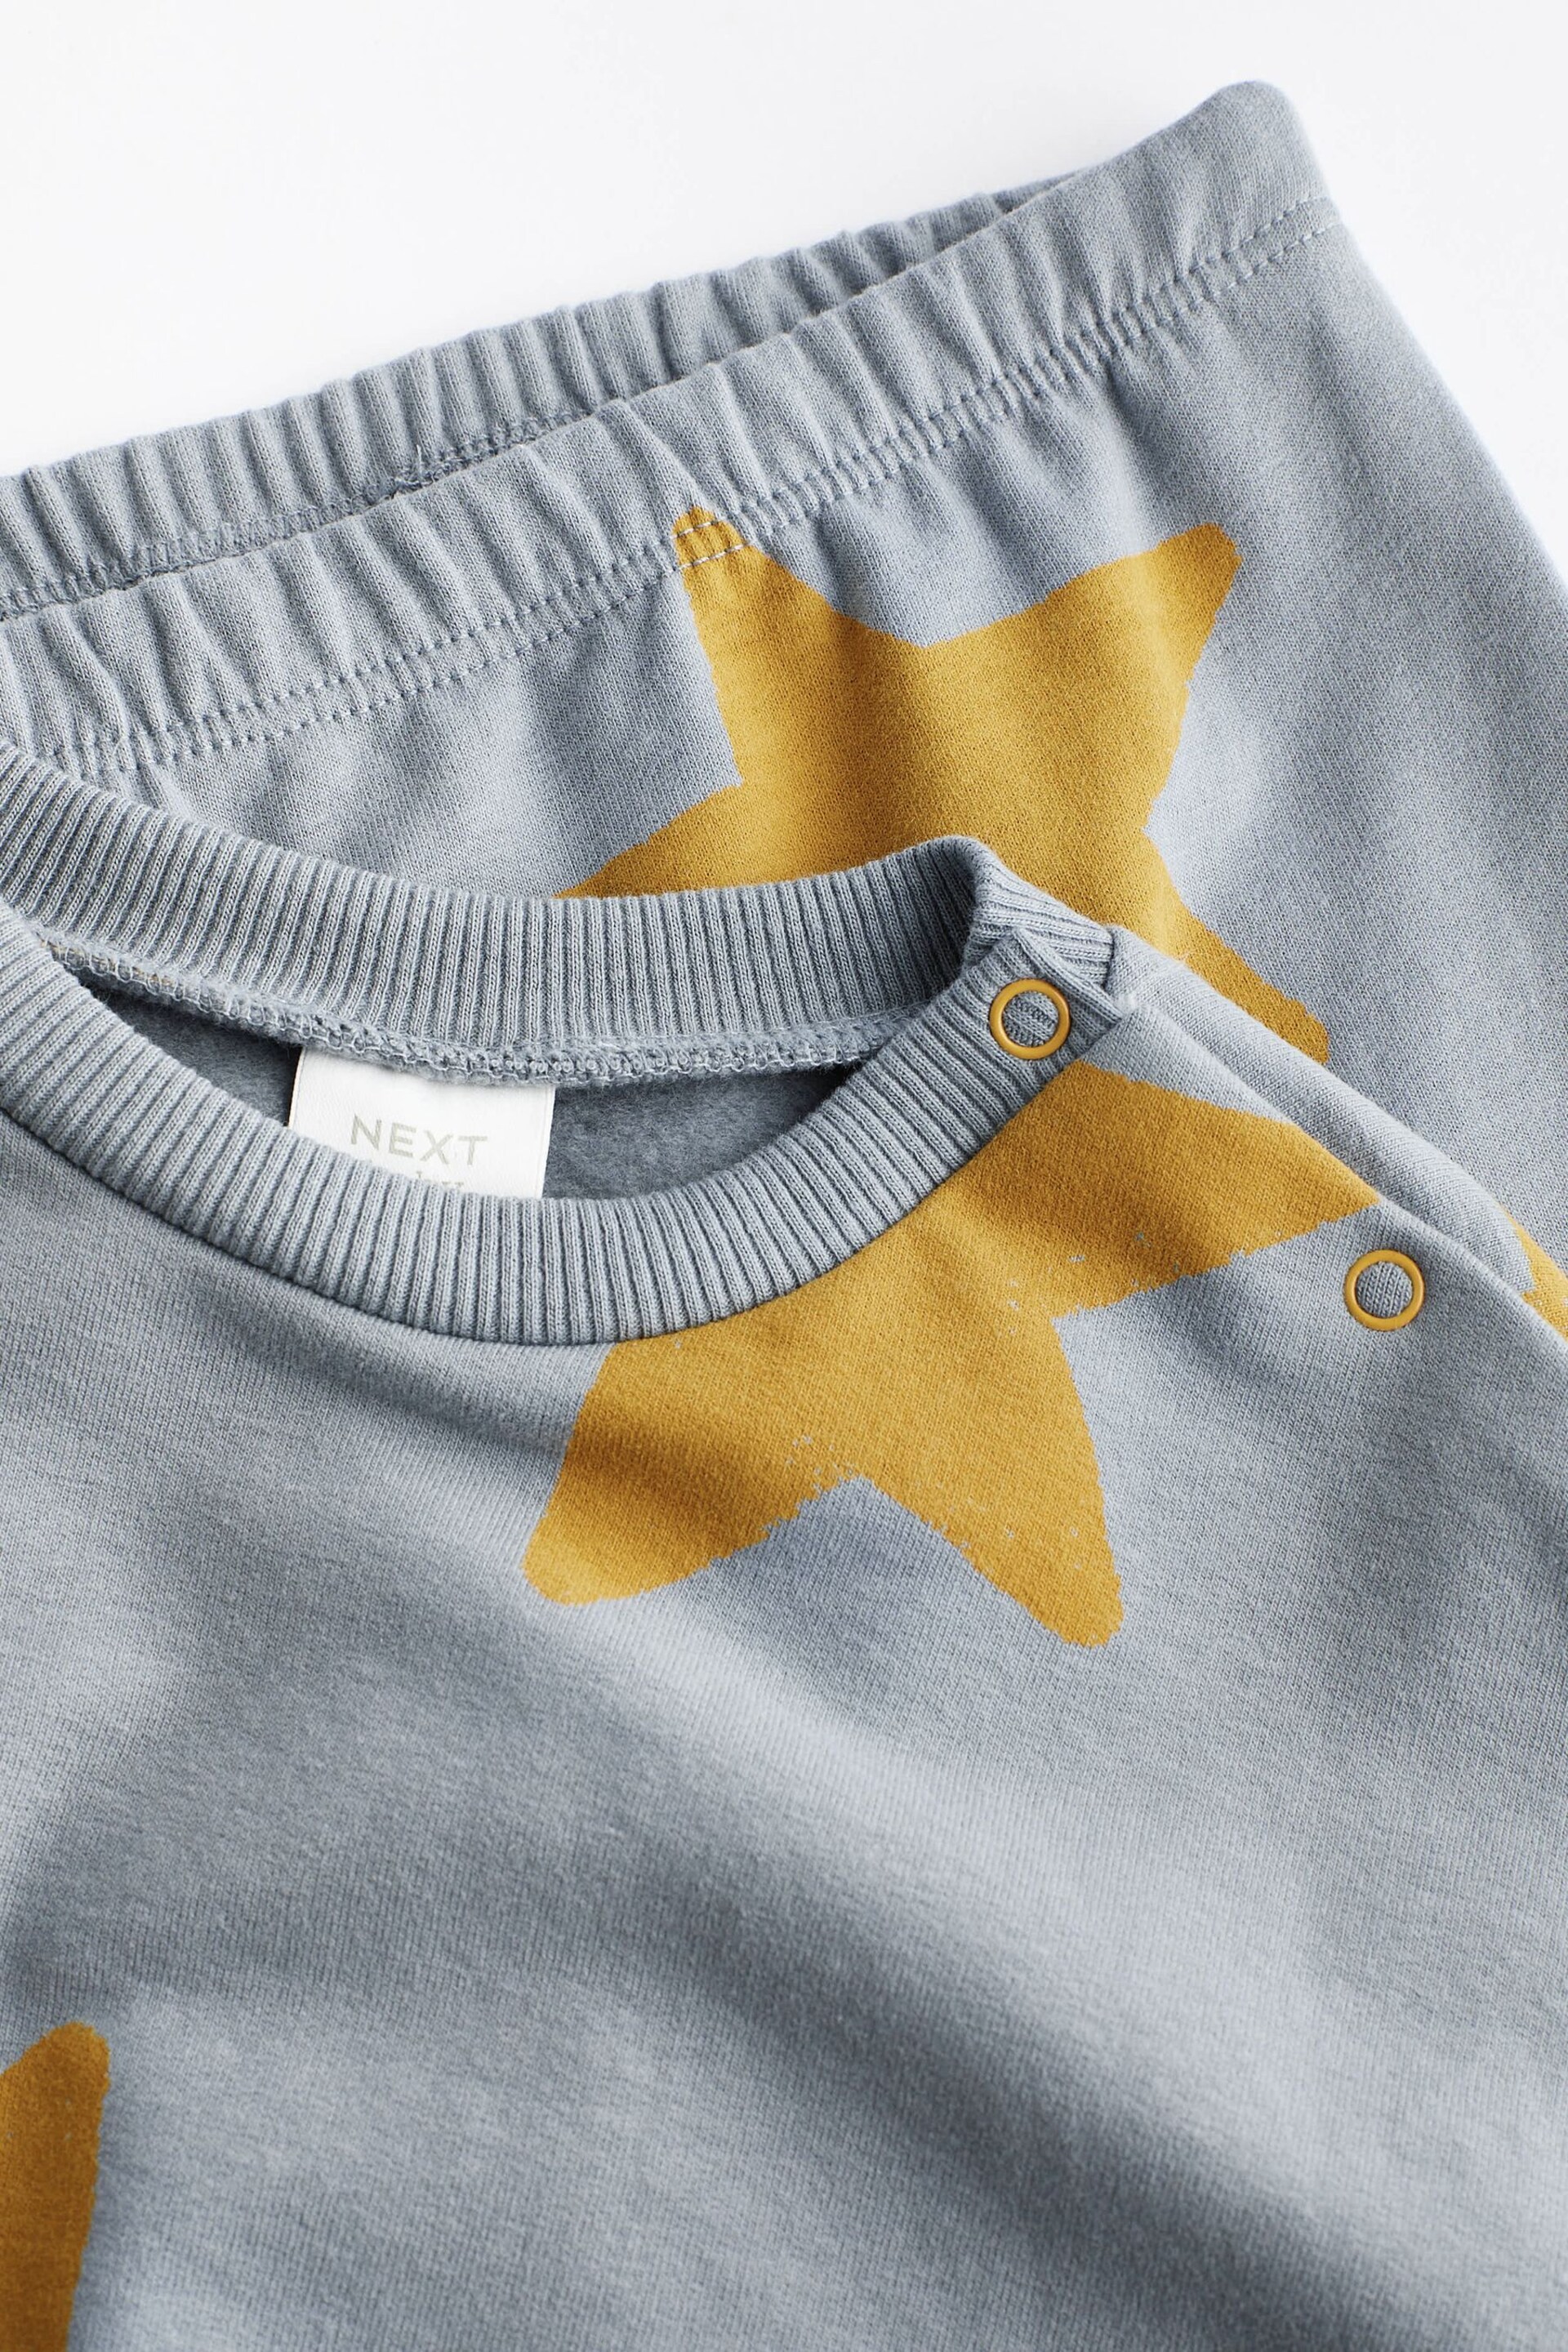 Blue Star Cosy Baby Sweatshirt And Joggers 2 Piece Set - Image 6 of 11